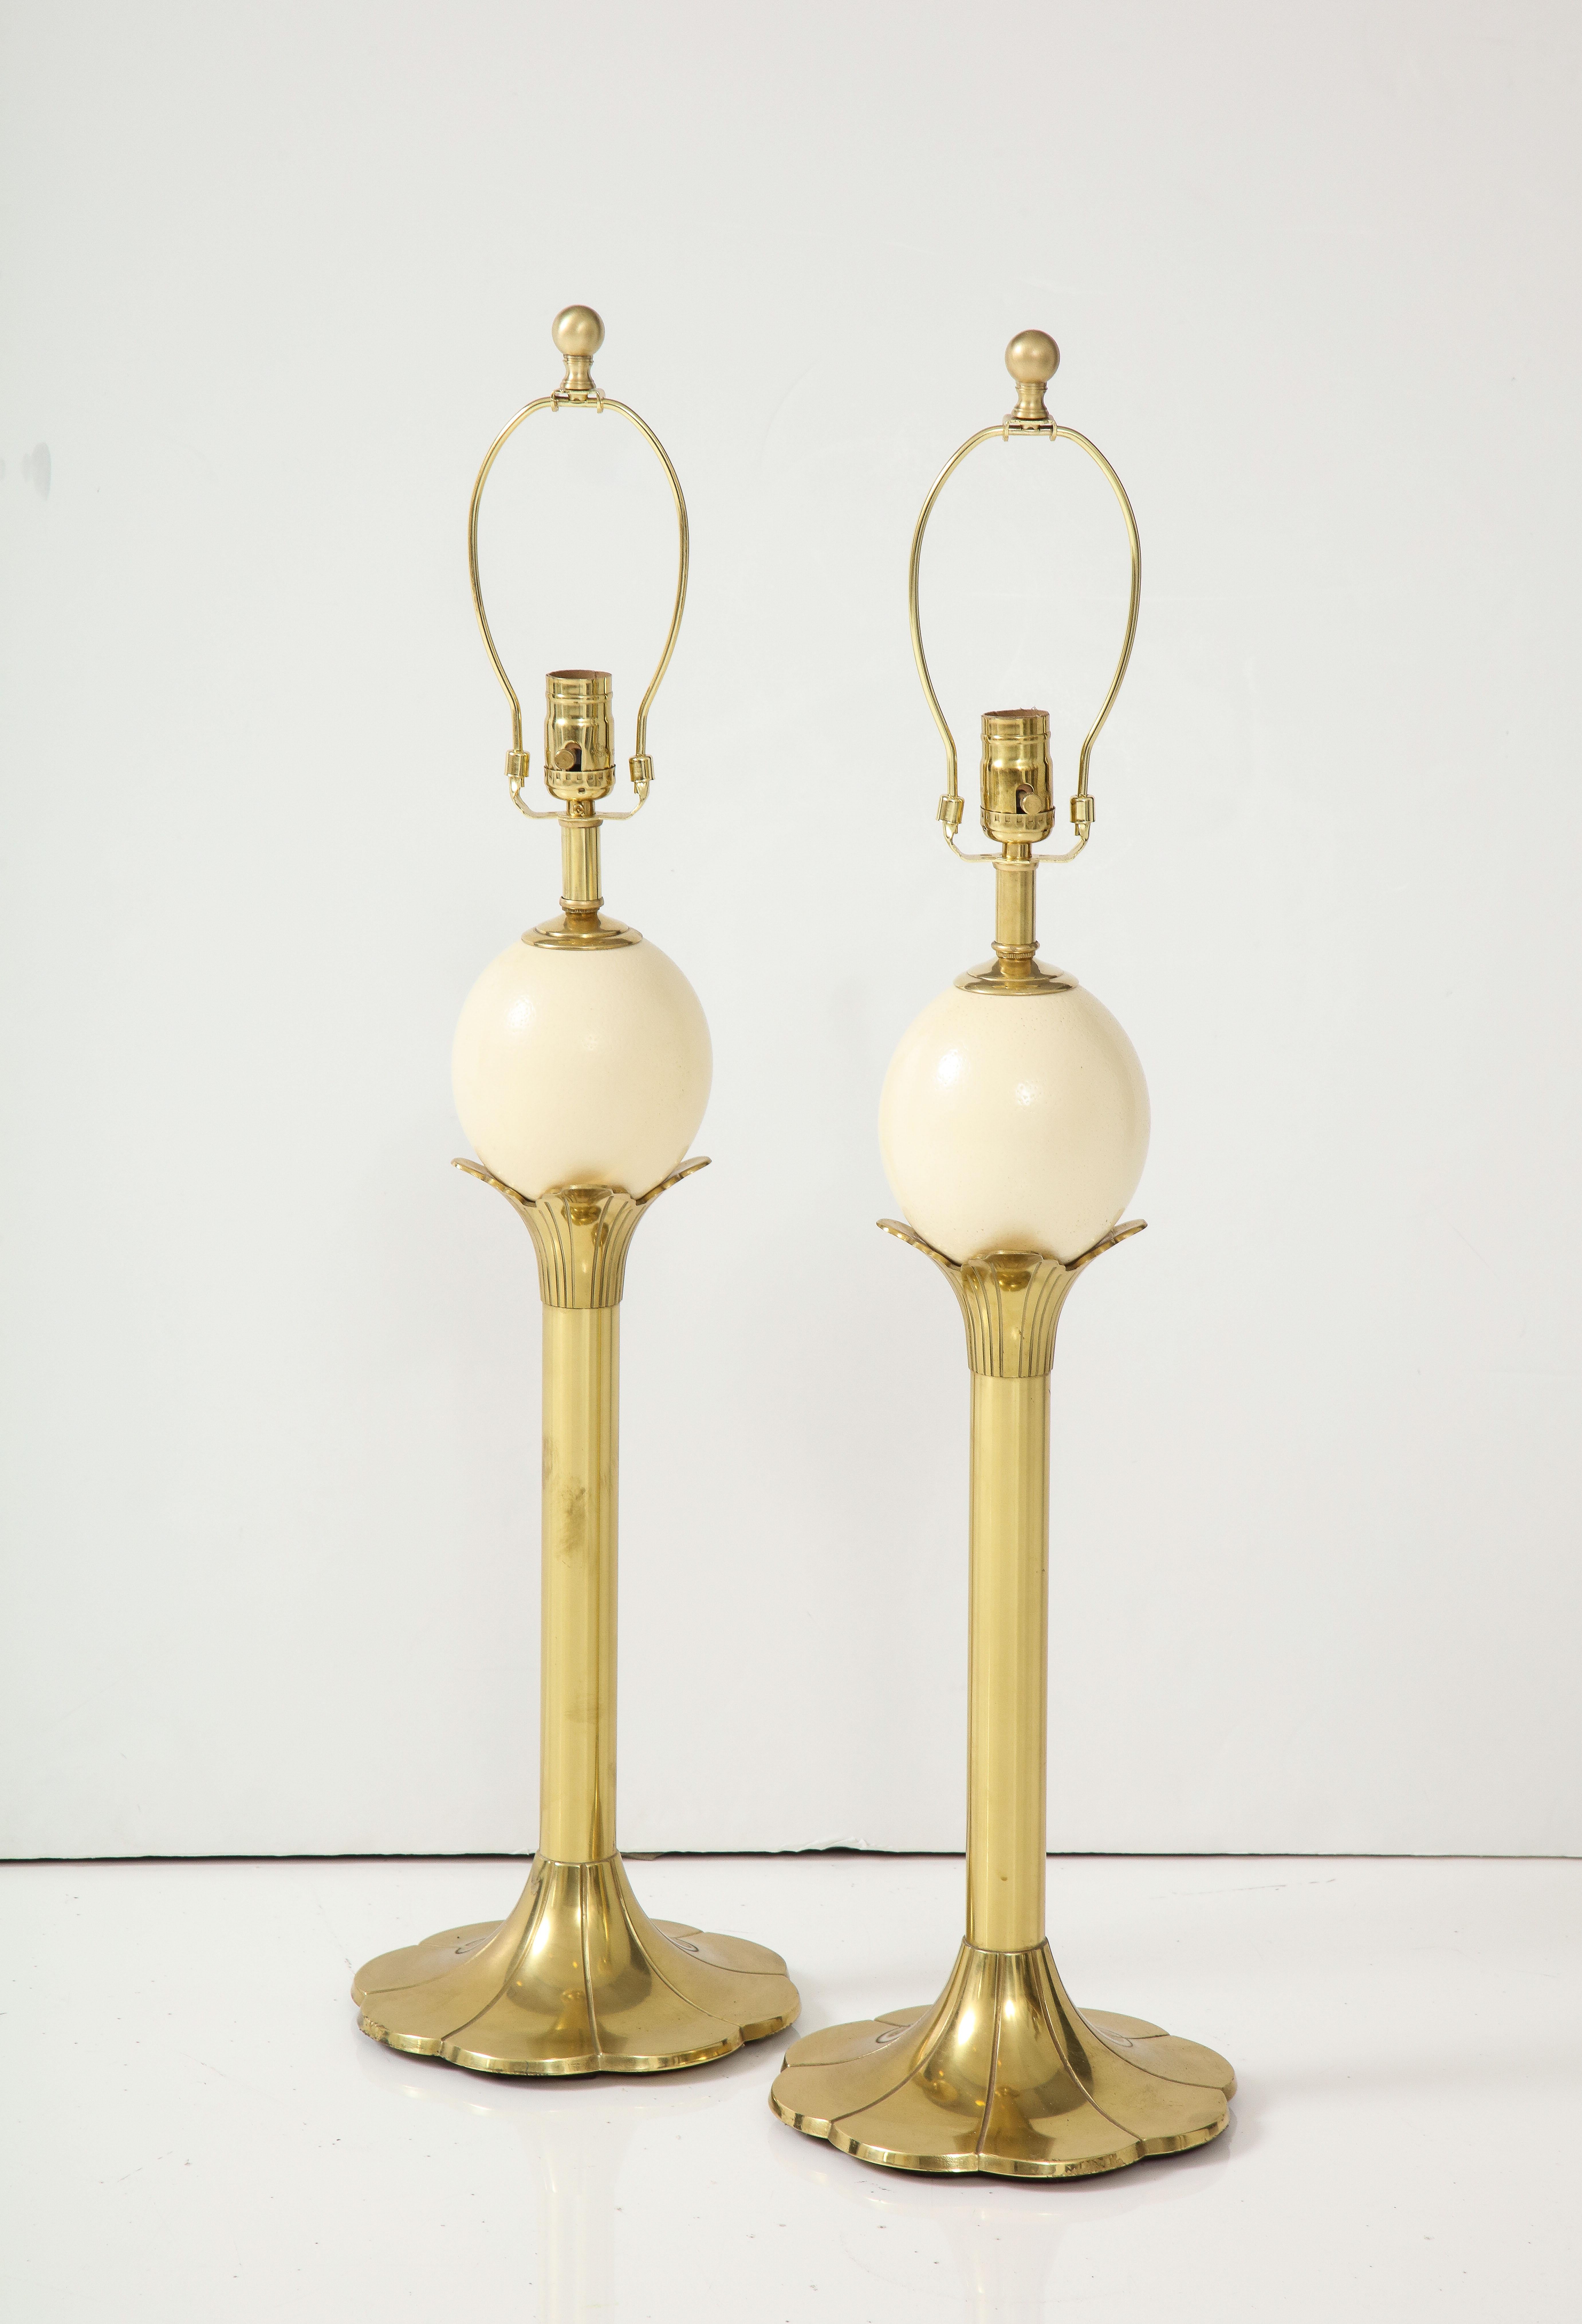 Pair of brass stylized palm tree form lamps topped with a genuine ostrich egg. Rewired for use in the USA, 100W max.